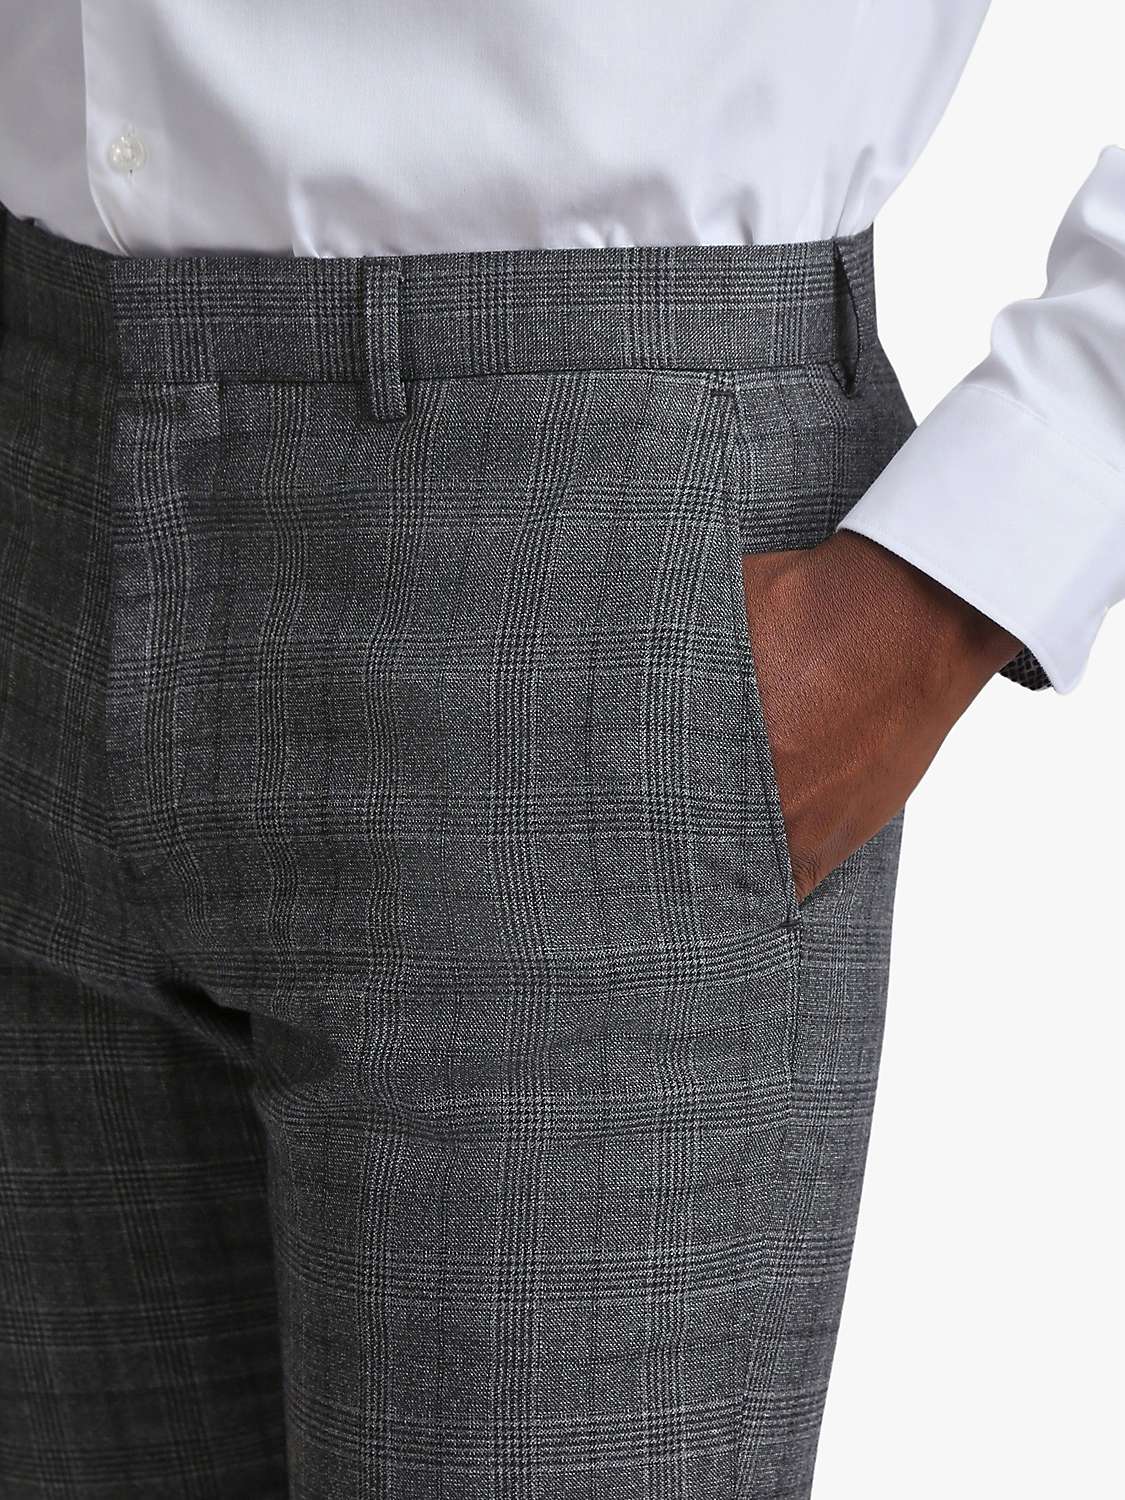 Buy Ted Baker Zion Slim Fit Wool Trousers, Charcoal Check Online at johnlewis.com